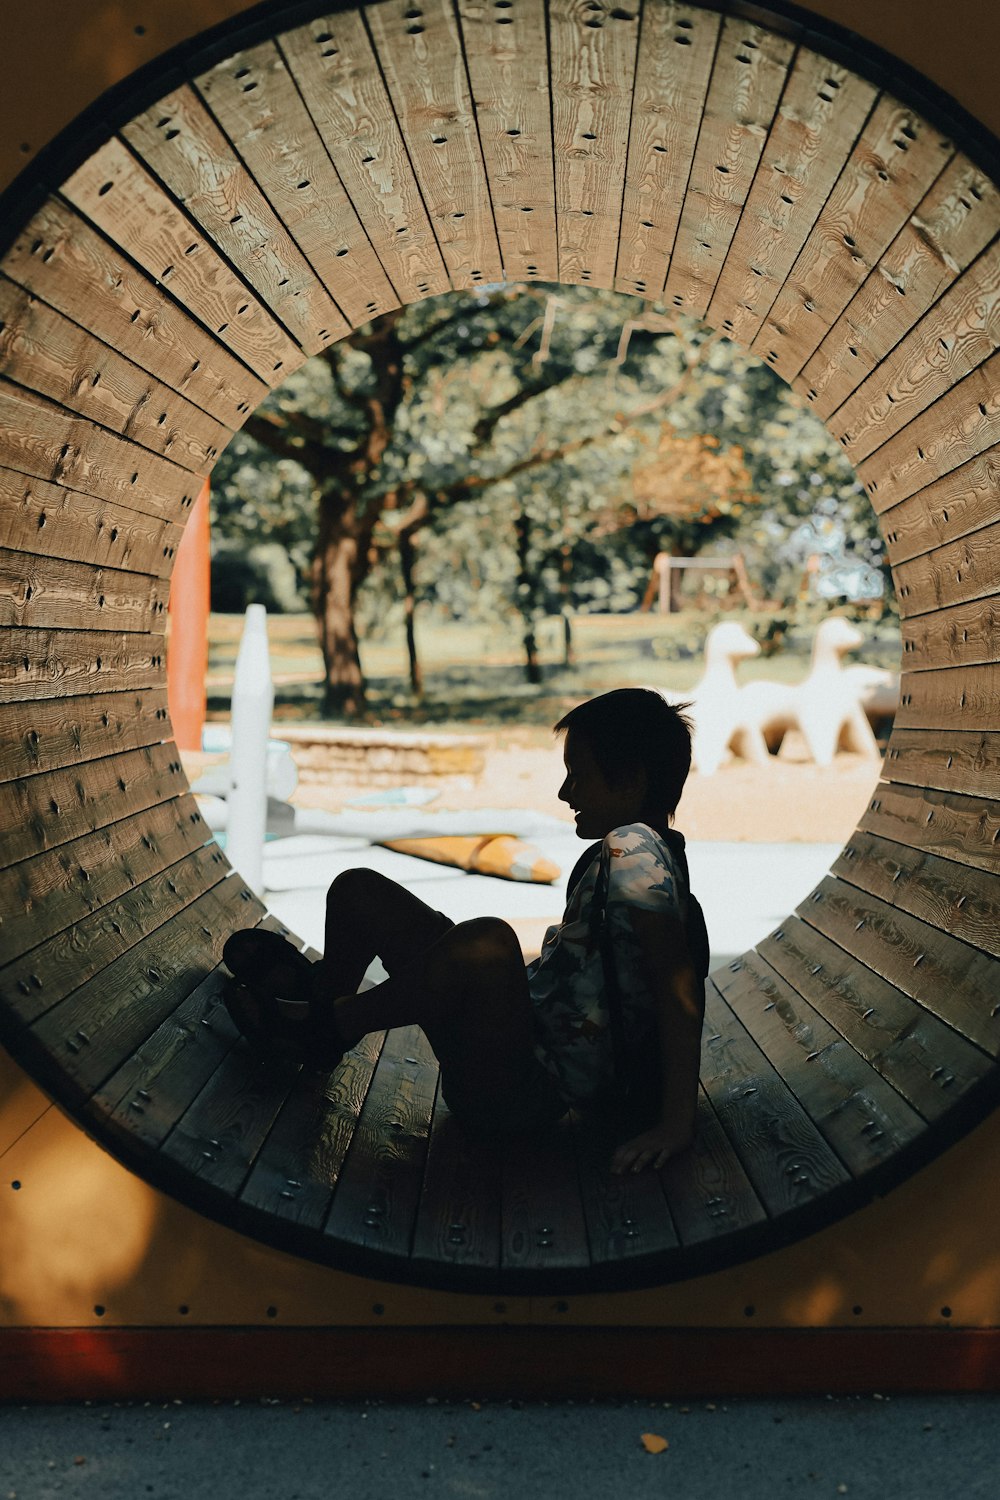 a young boy sitting in front of a circular window